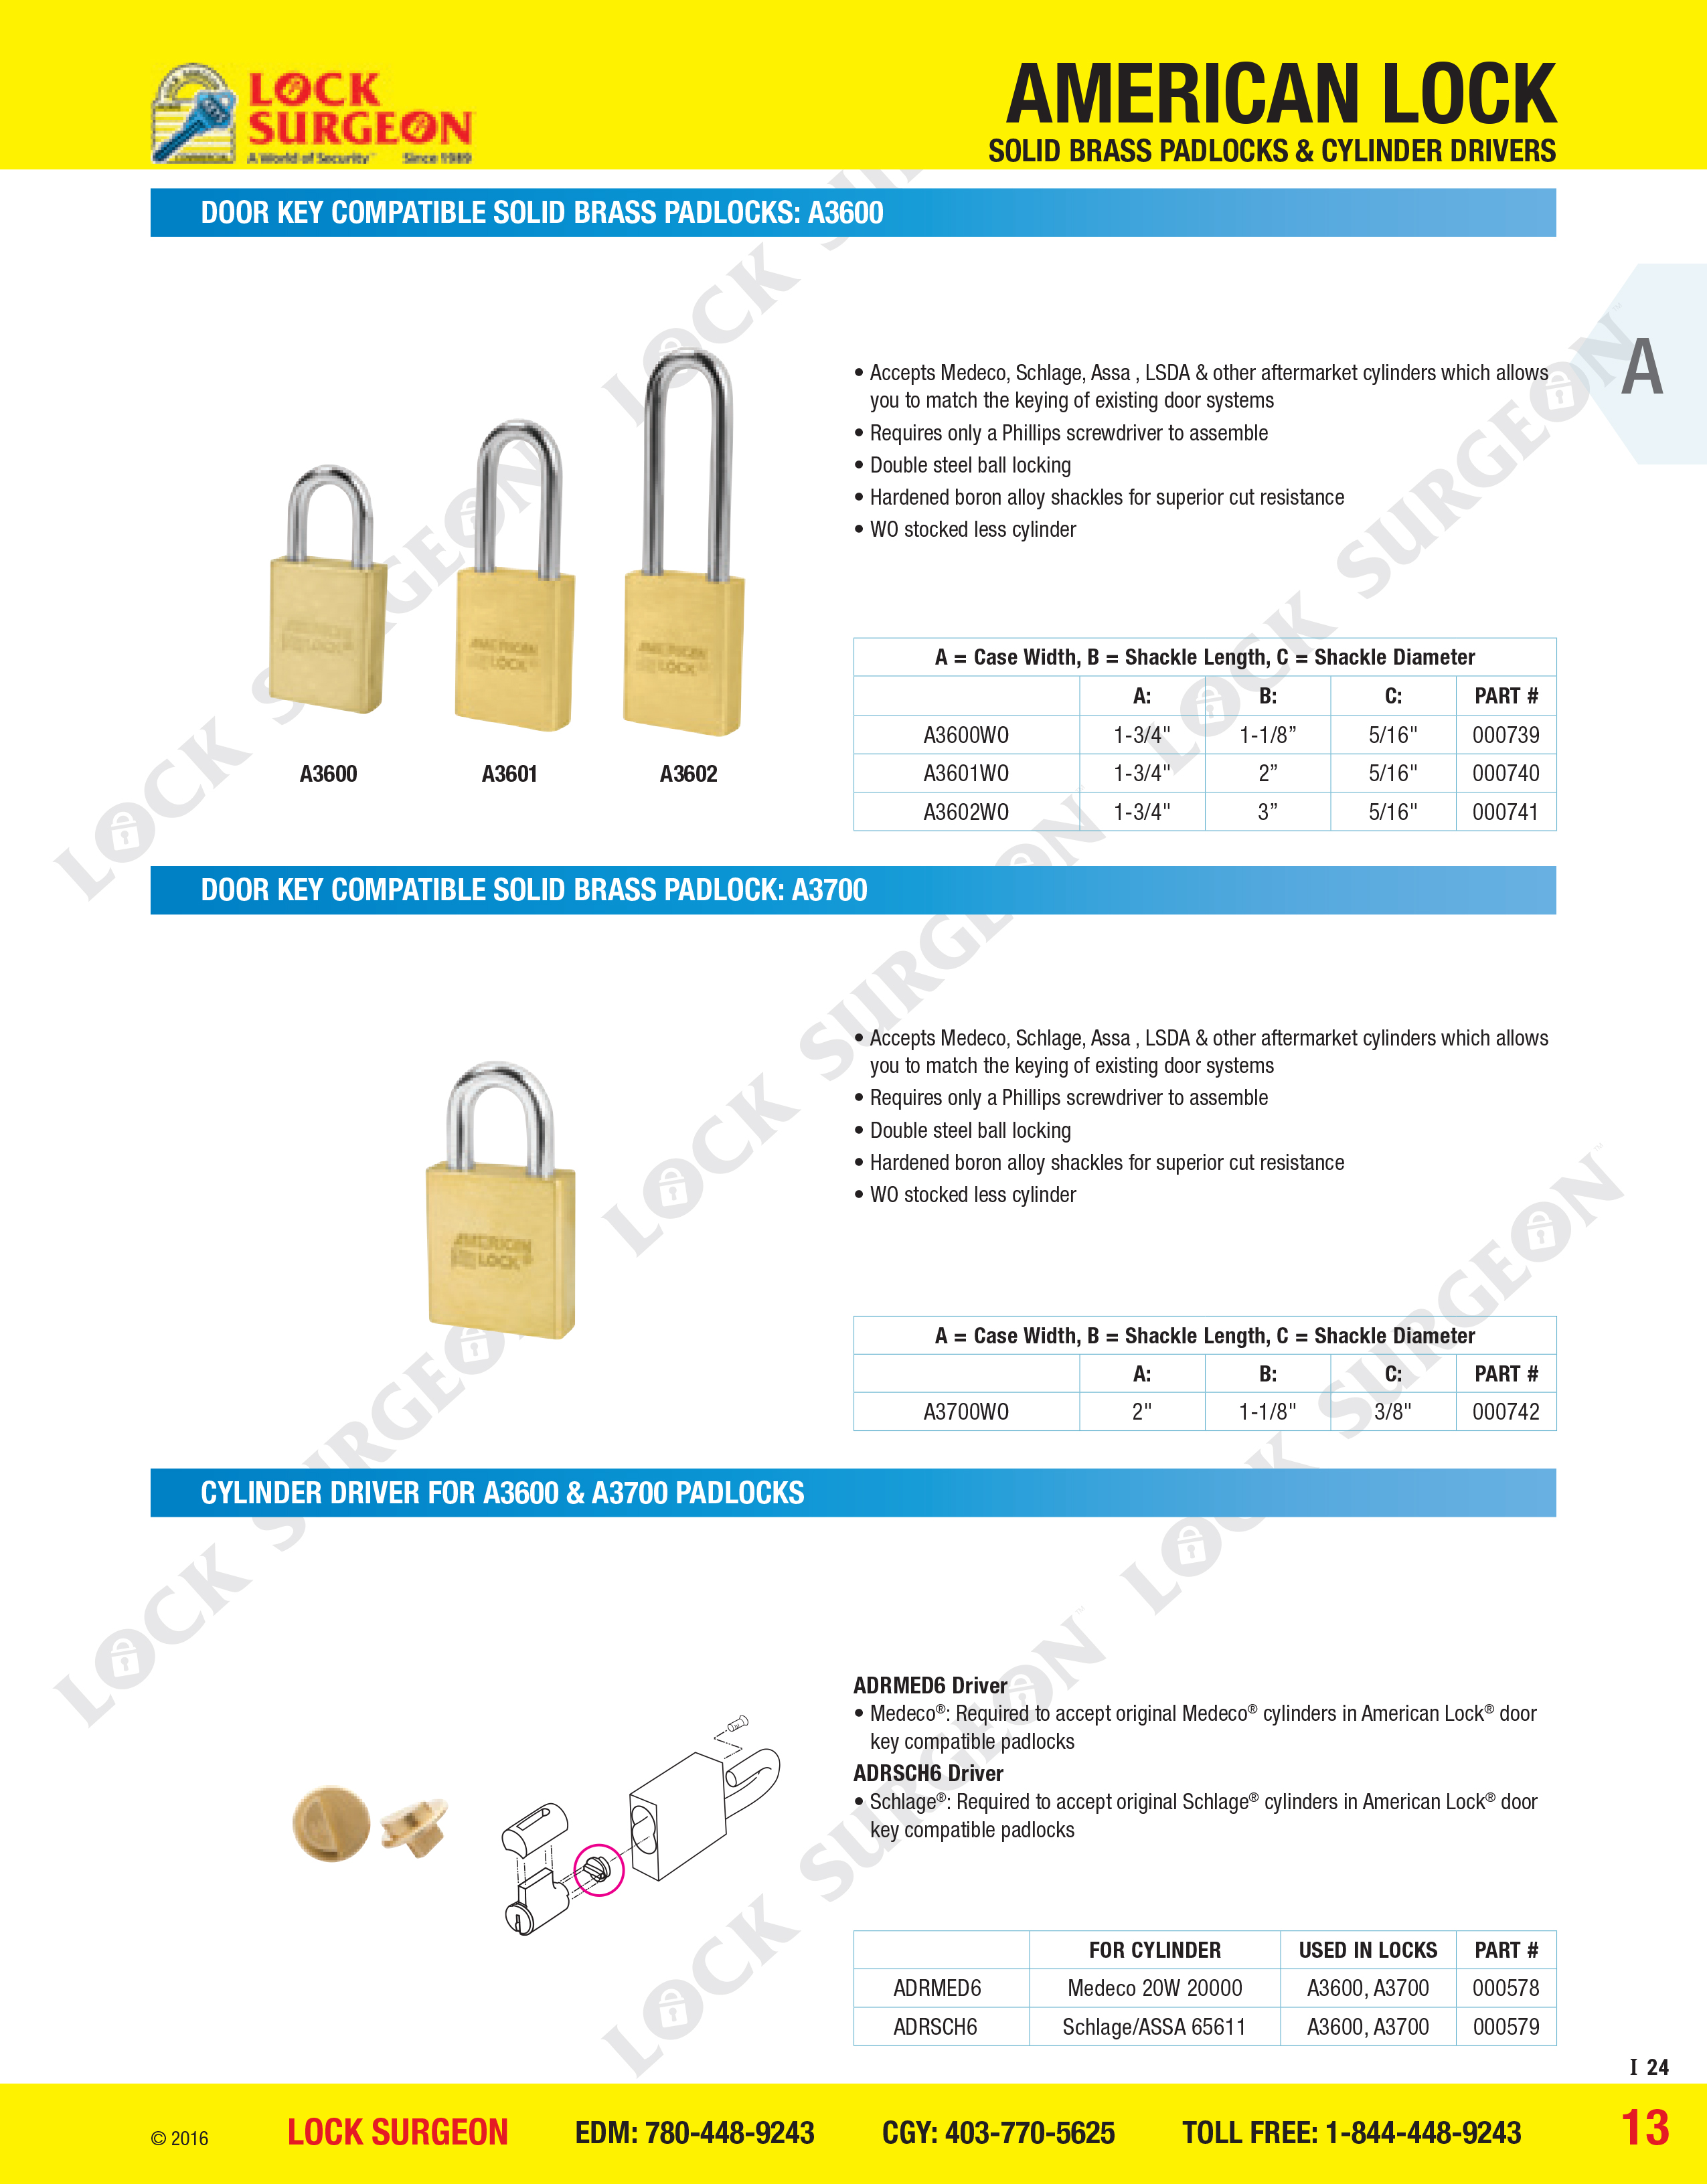 American Lock Door key compatible solid brass: A3600, A3700 Cylider drivers for A3600, A3700 Padlock